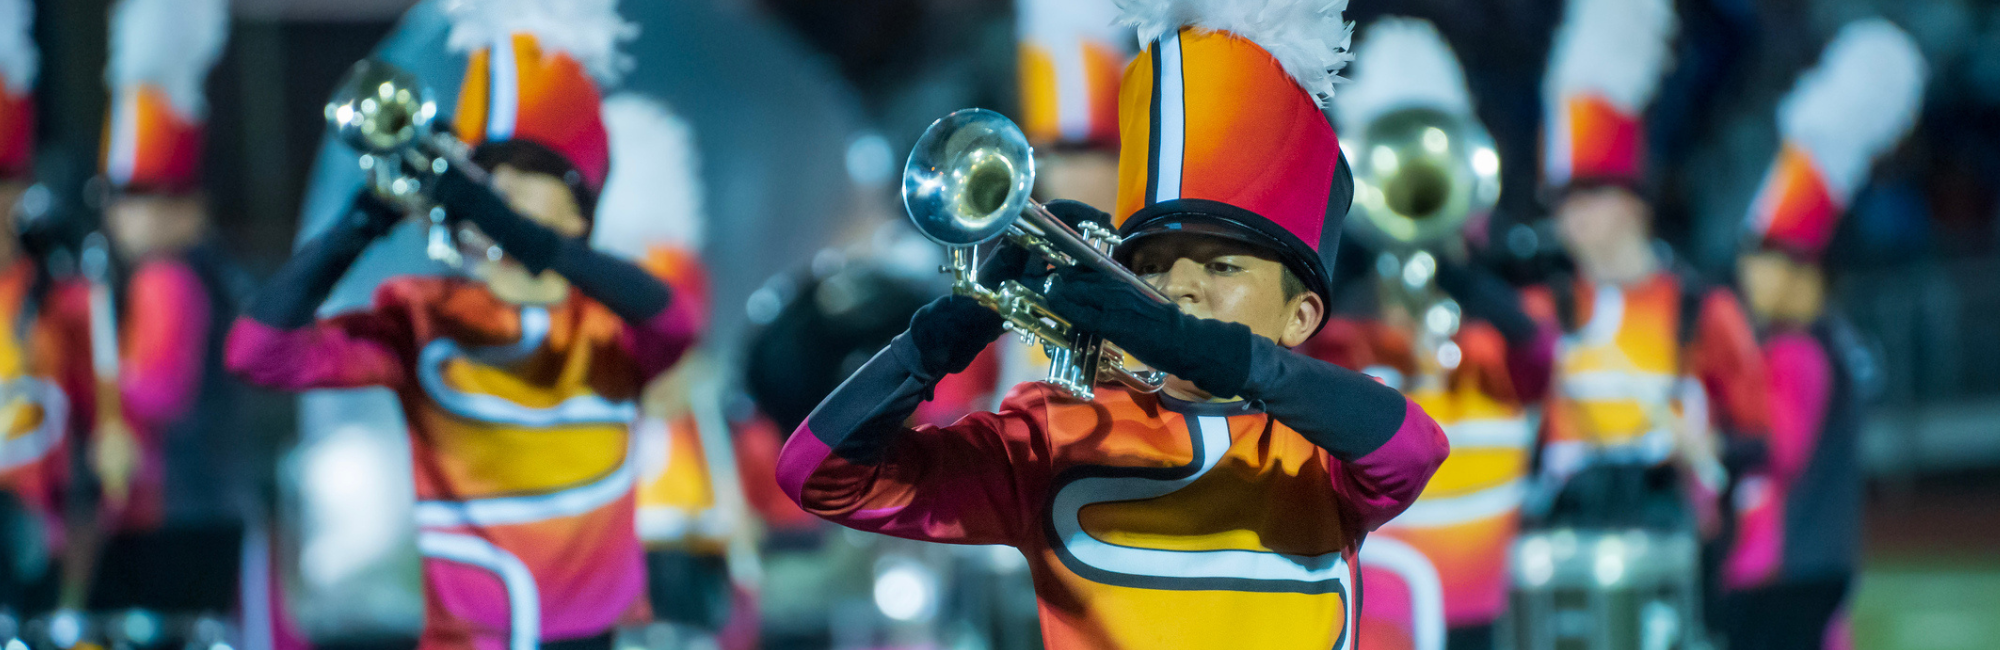 Copy of 2021 Marching Season Website Slide Show (1400 × 400 px) (2000 × 400 px) (2000 × 650 px)